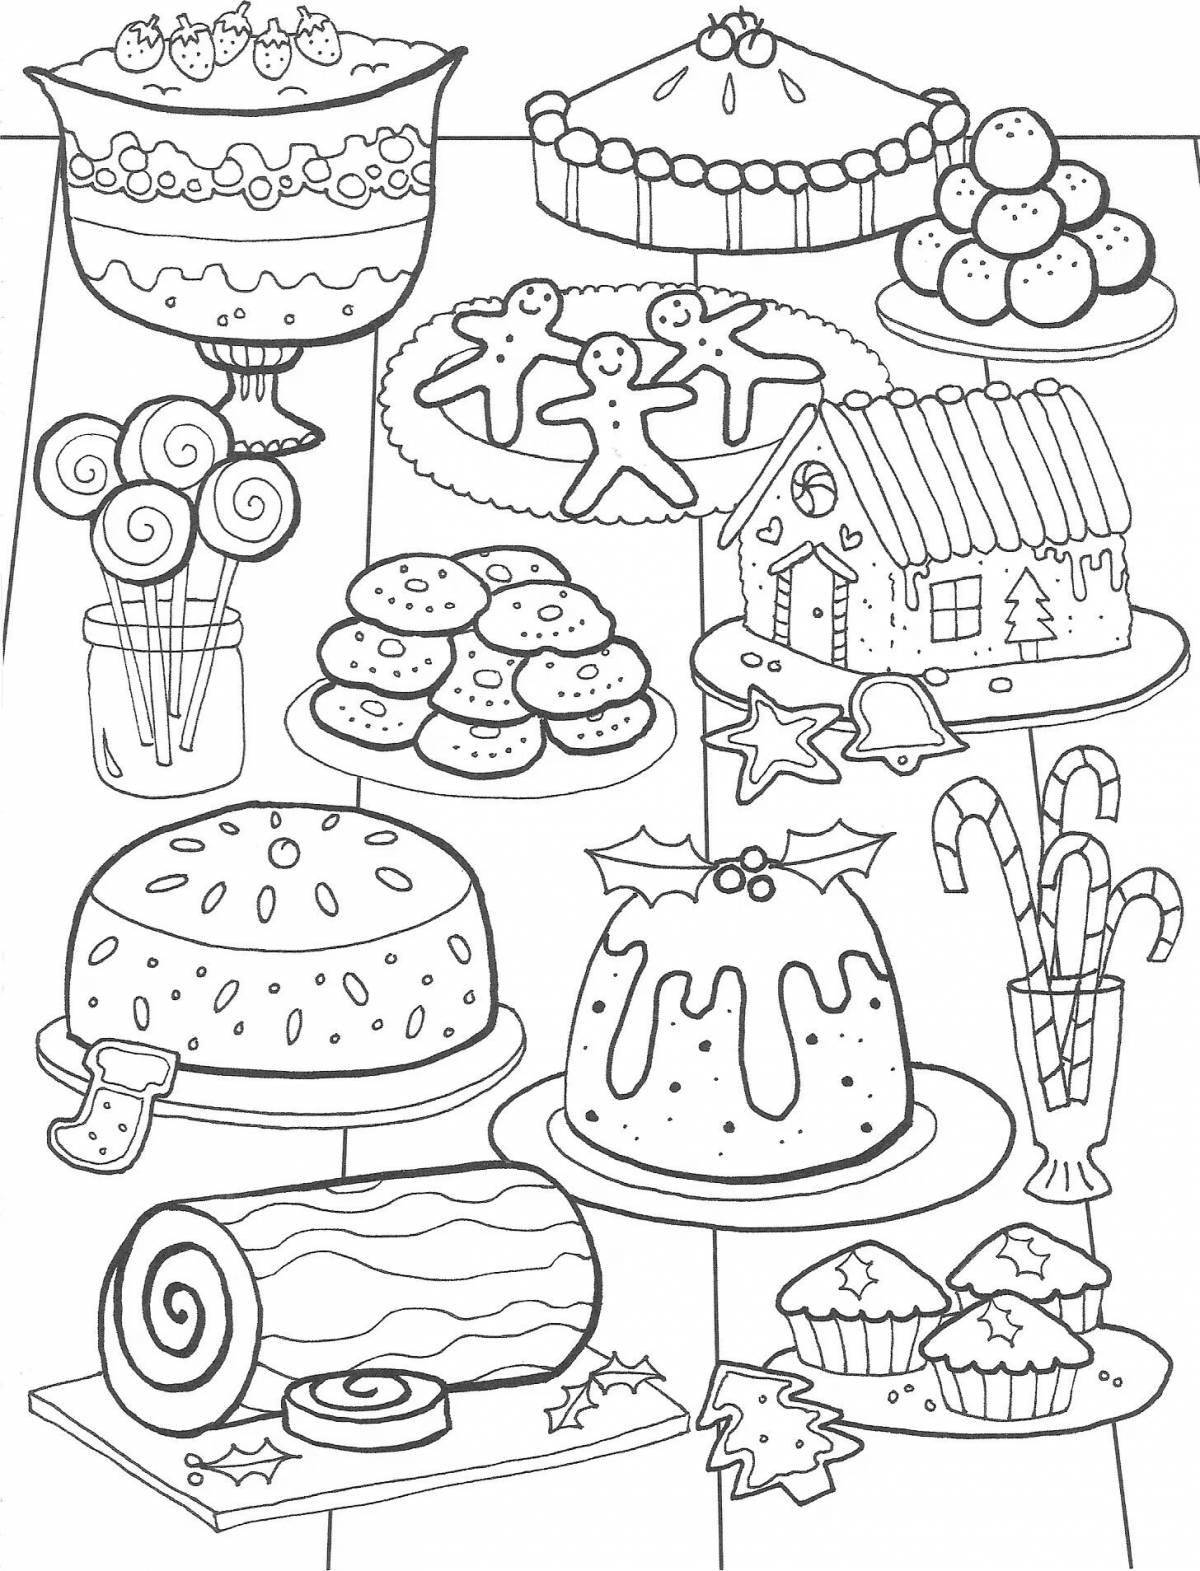 Exciting sweets coloring pages for girls